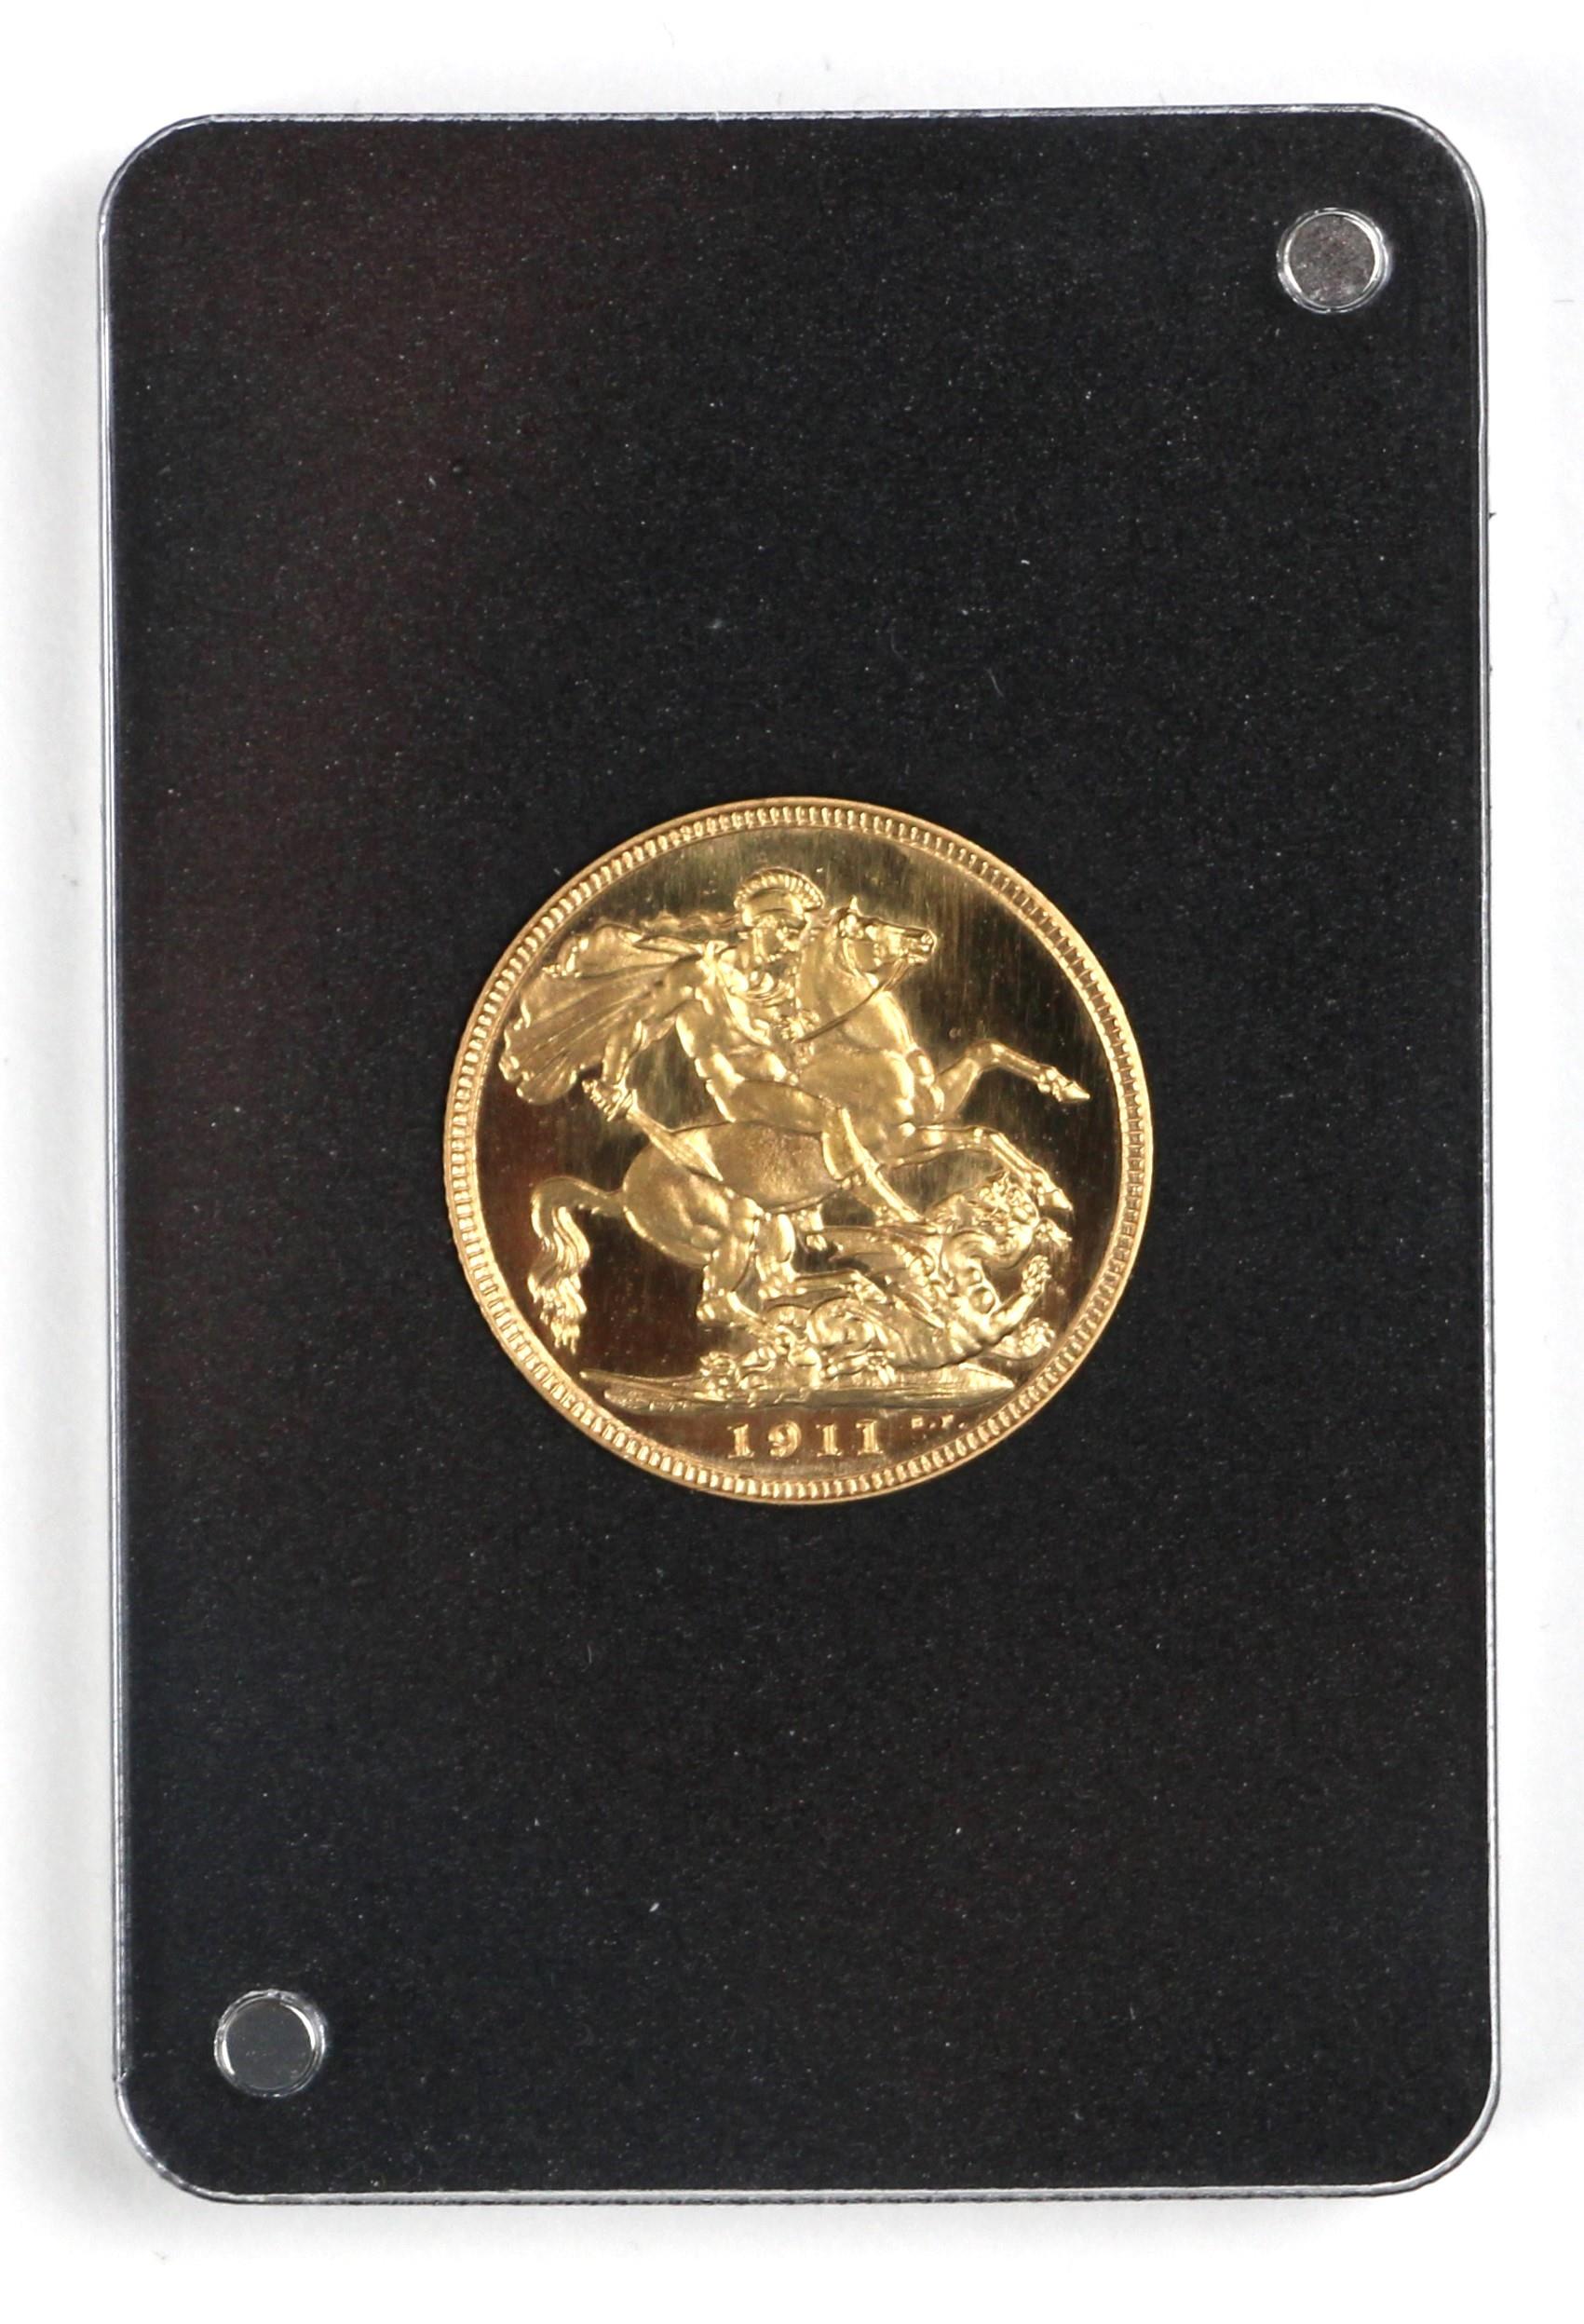 George V (1910-1936), Full Sovereign, 1911, proof, London Mint, St George reverse, encapsulated